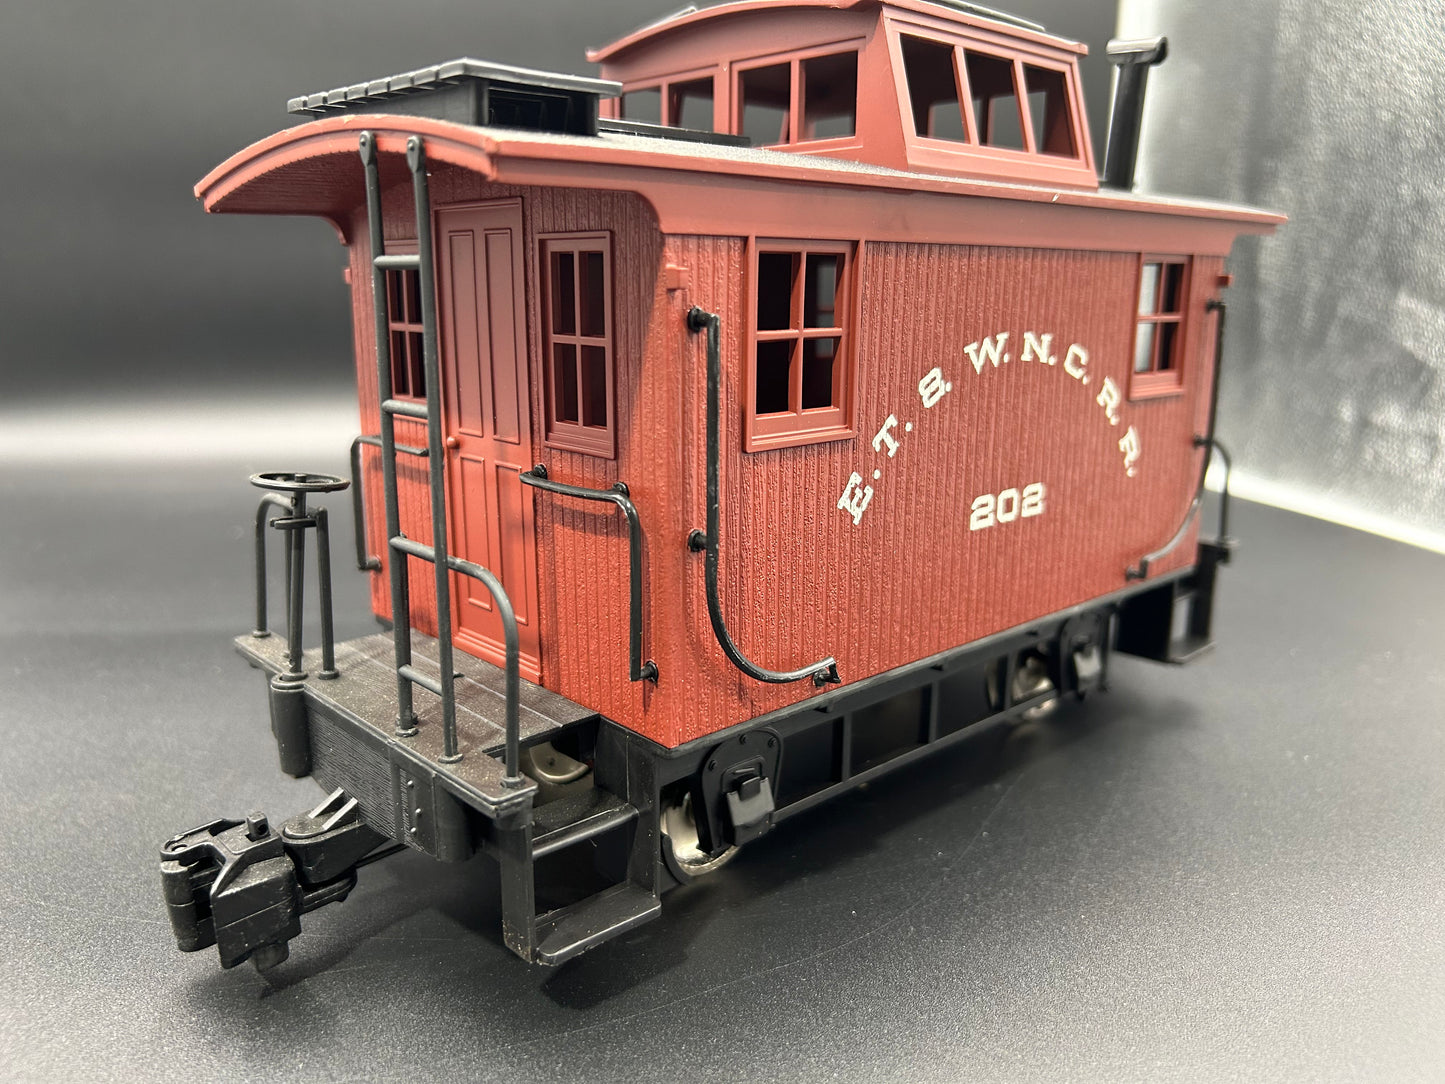 Bachman 93820 "L" Bobber and Logging Caboose